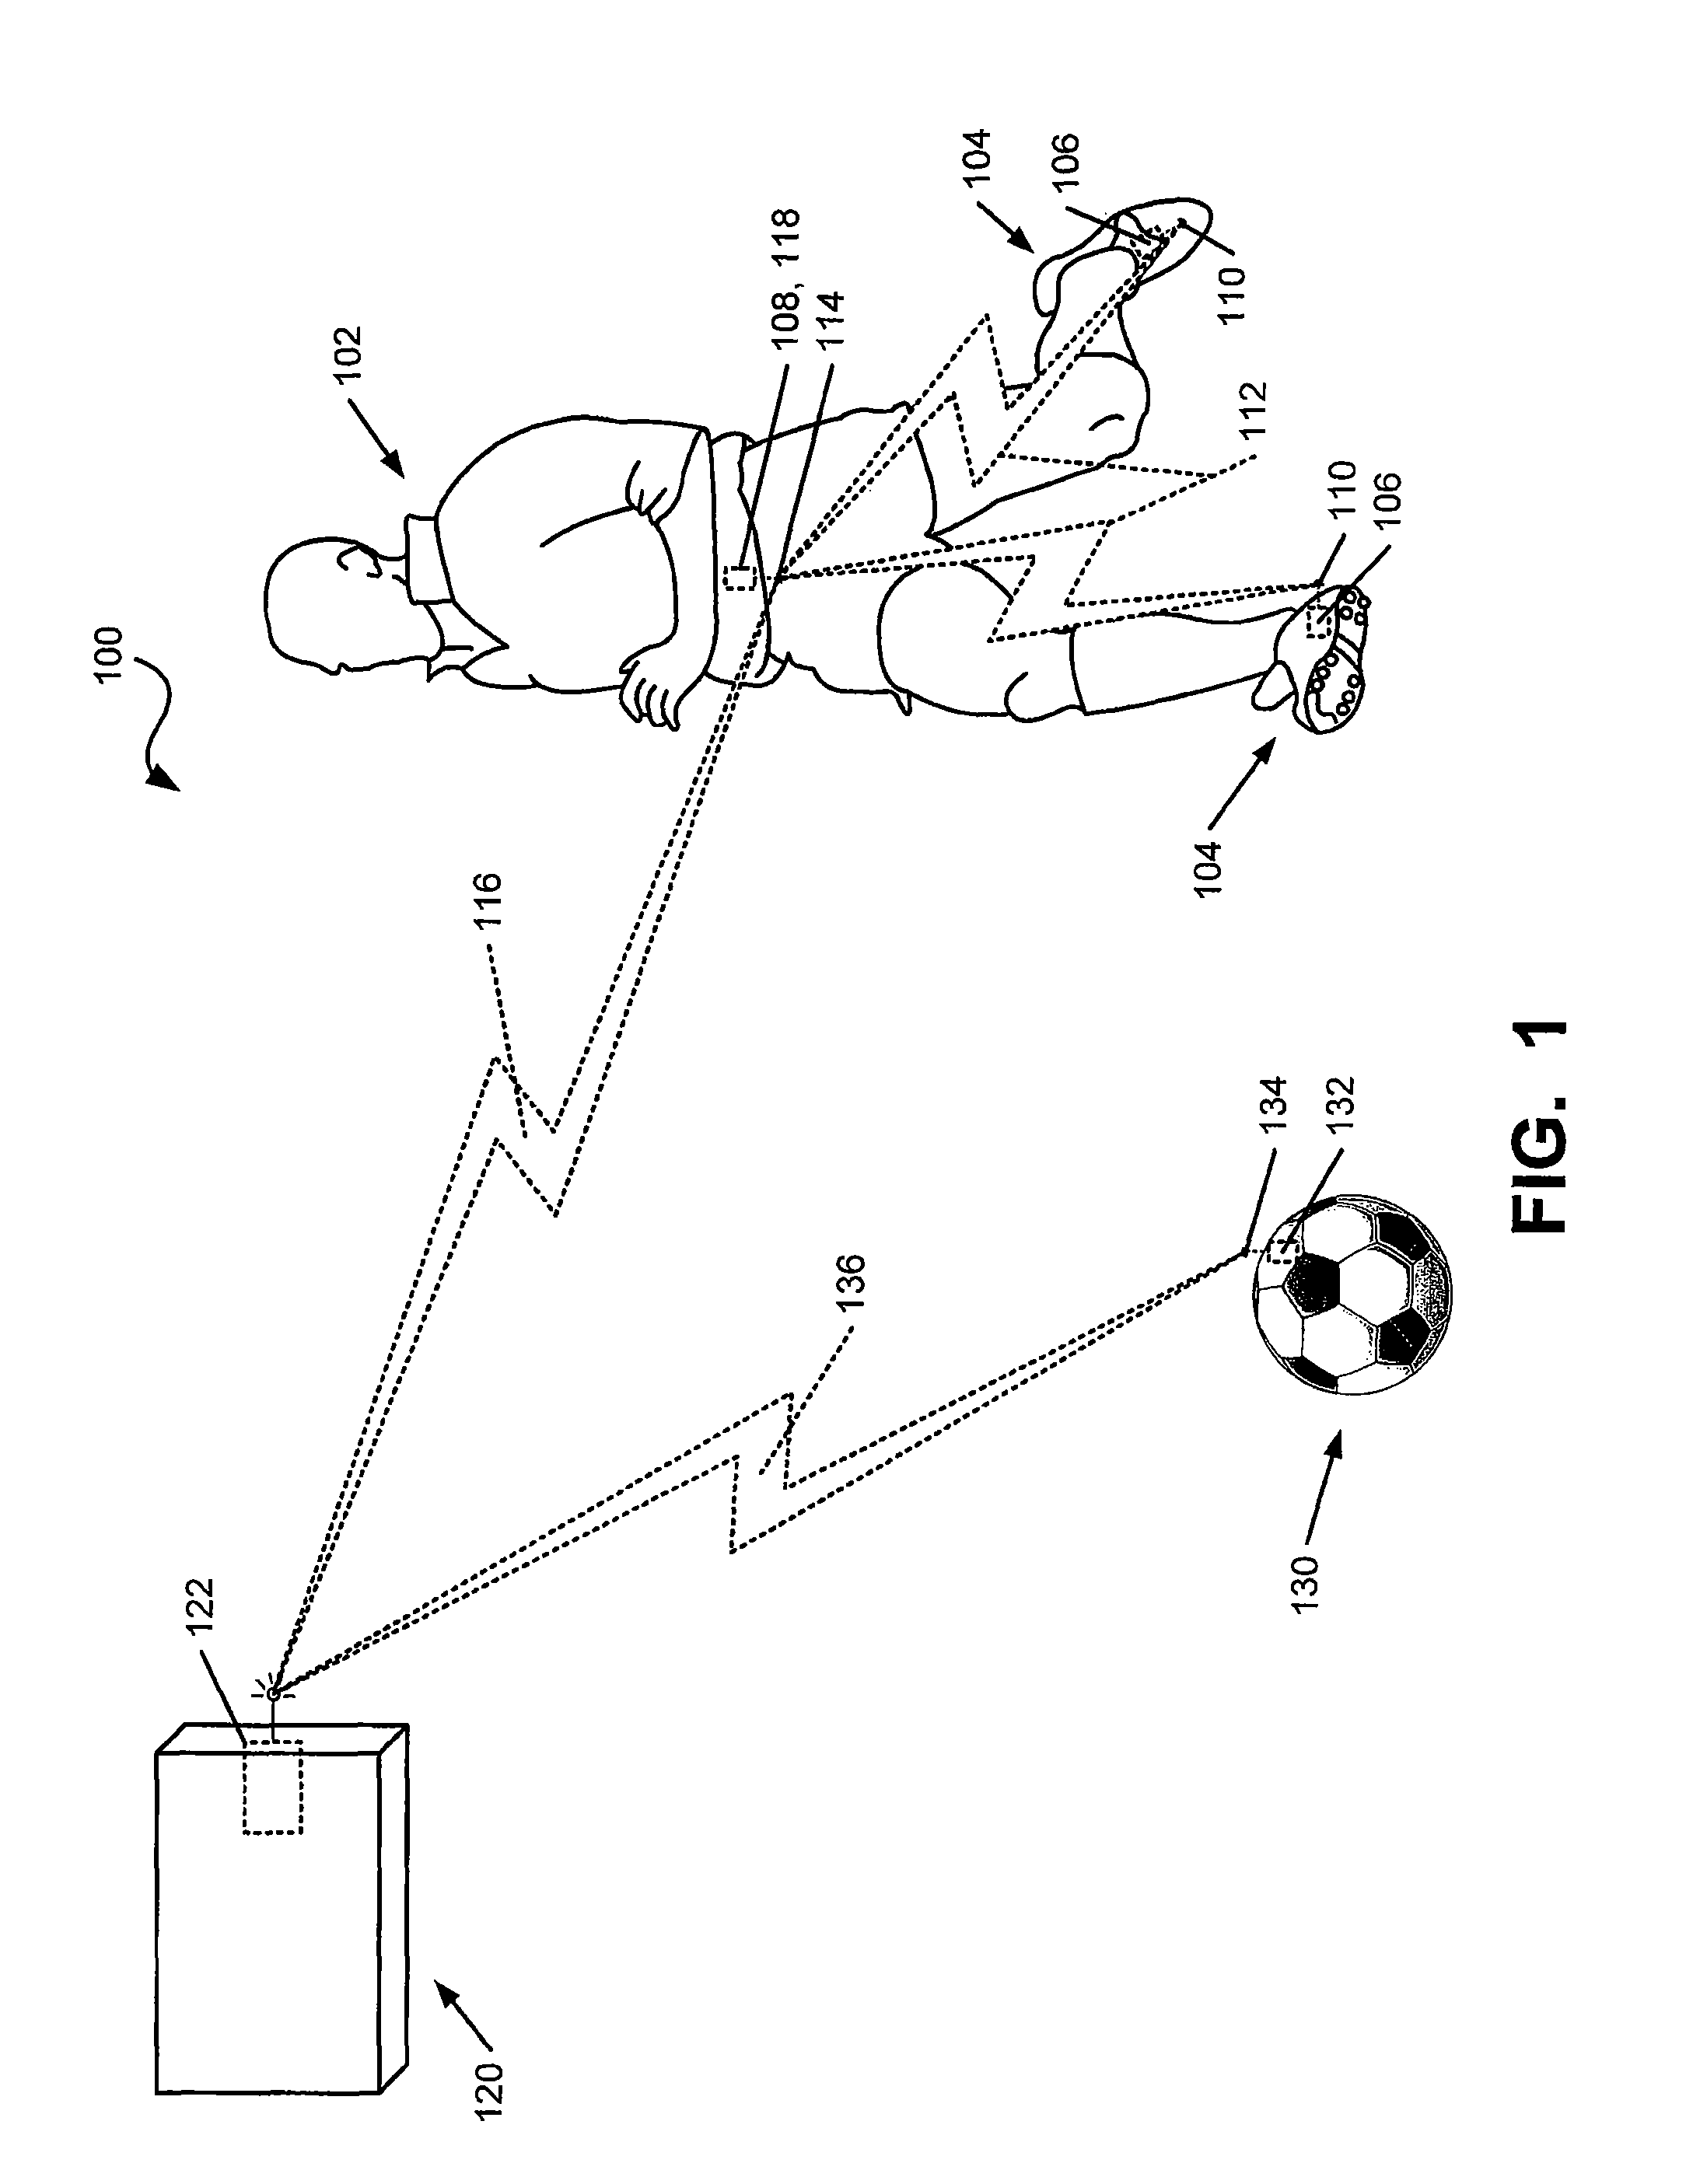 Athletic performance monitoring systems and methods in a team sports environment